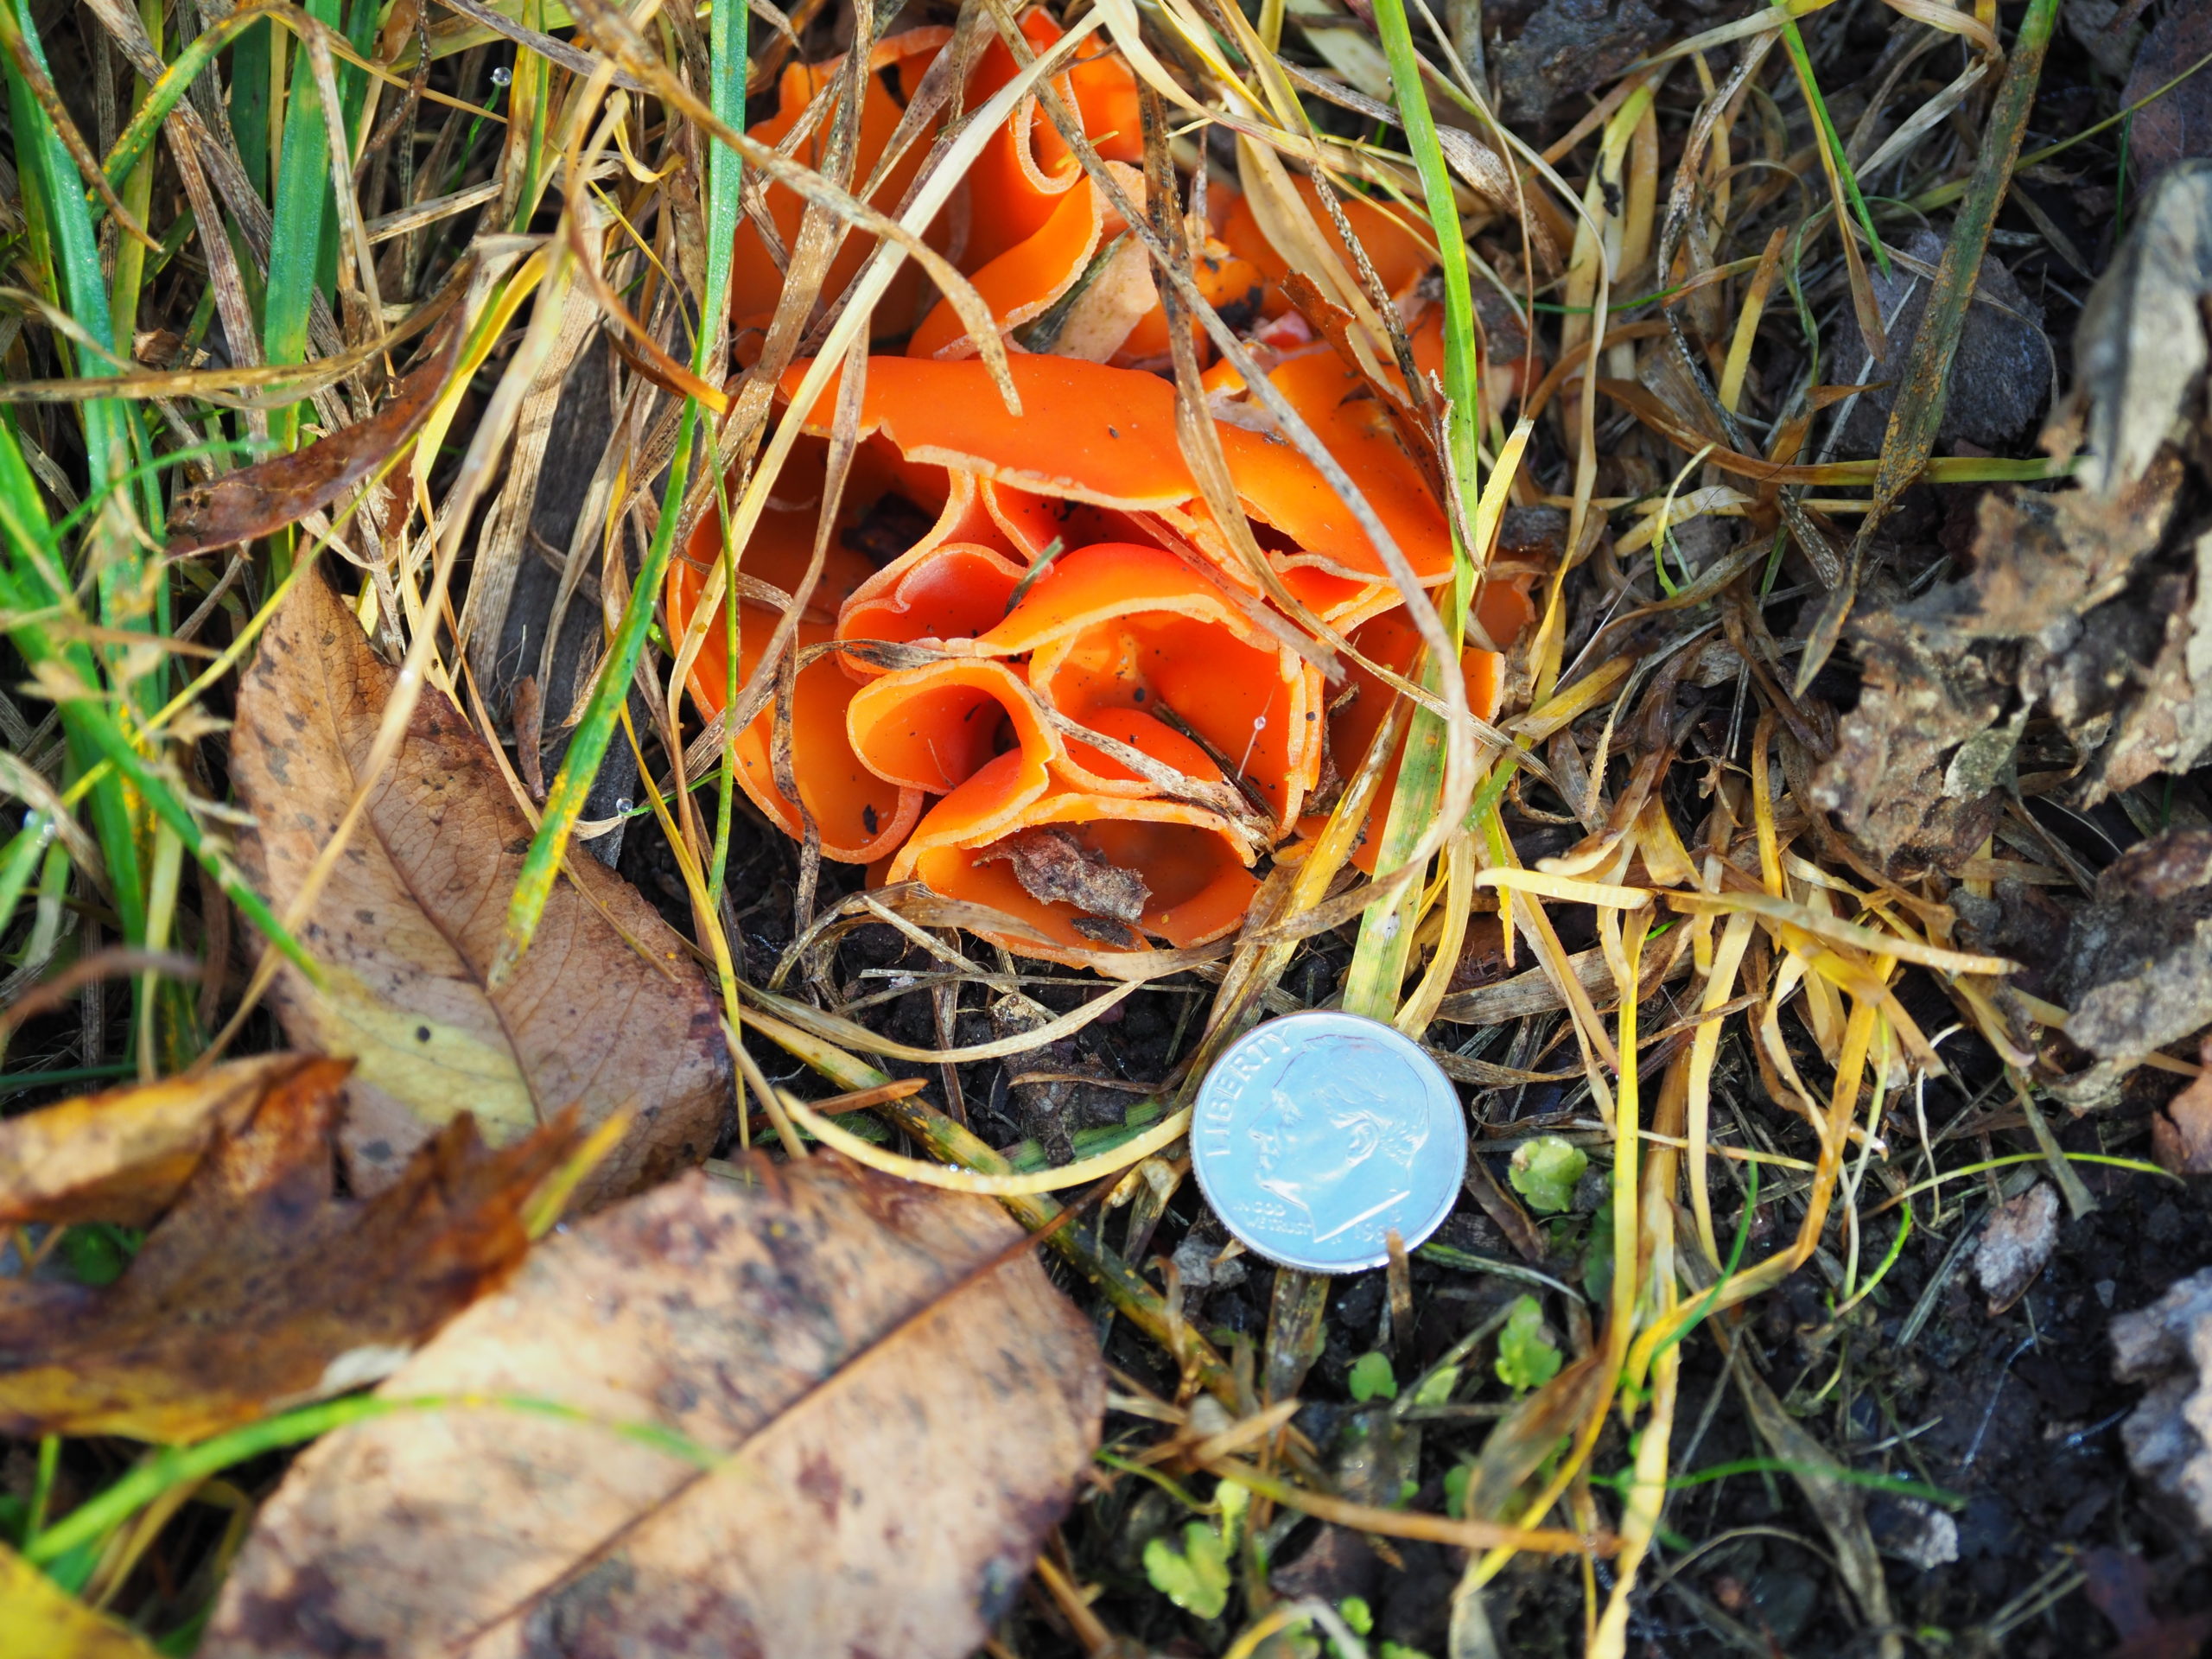 These orange peel fungi showed up around the stump of a maple tree that was removed two years ago. The harmless fungi often show up after decay of the wood scraps takes place. The dime is for size reference.